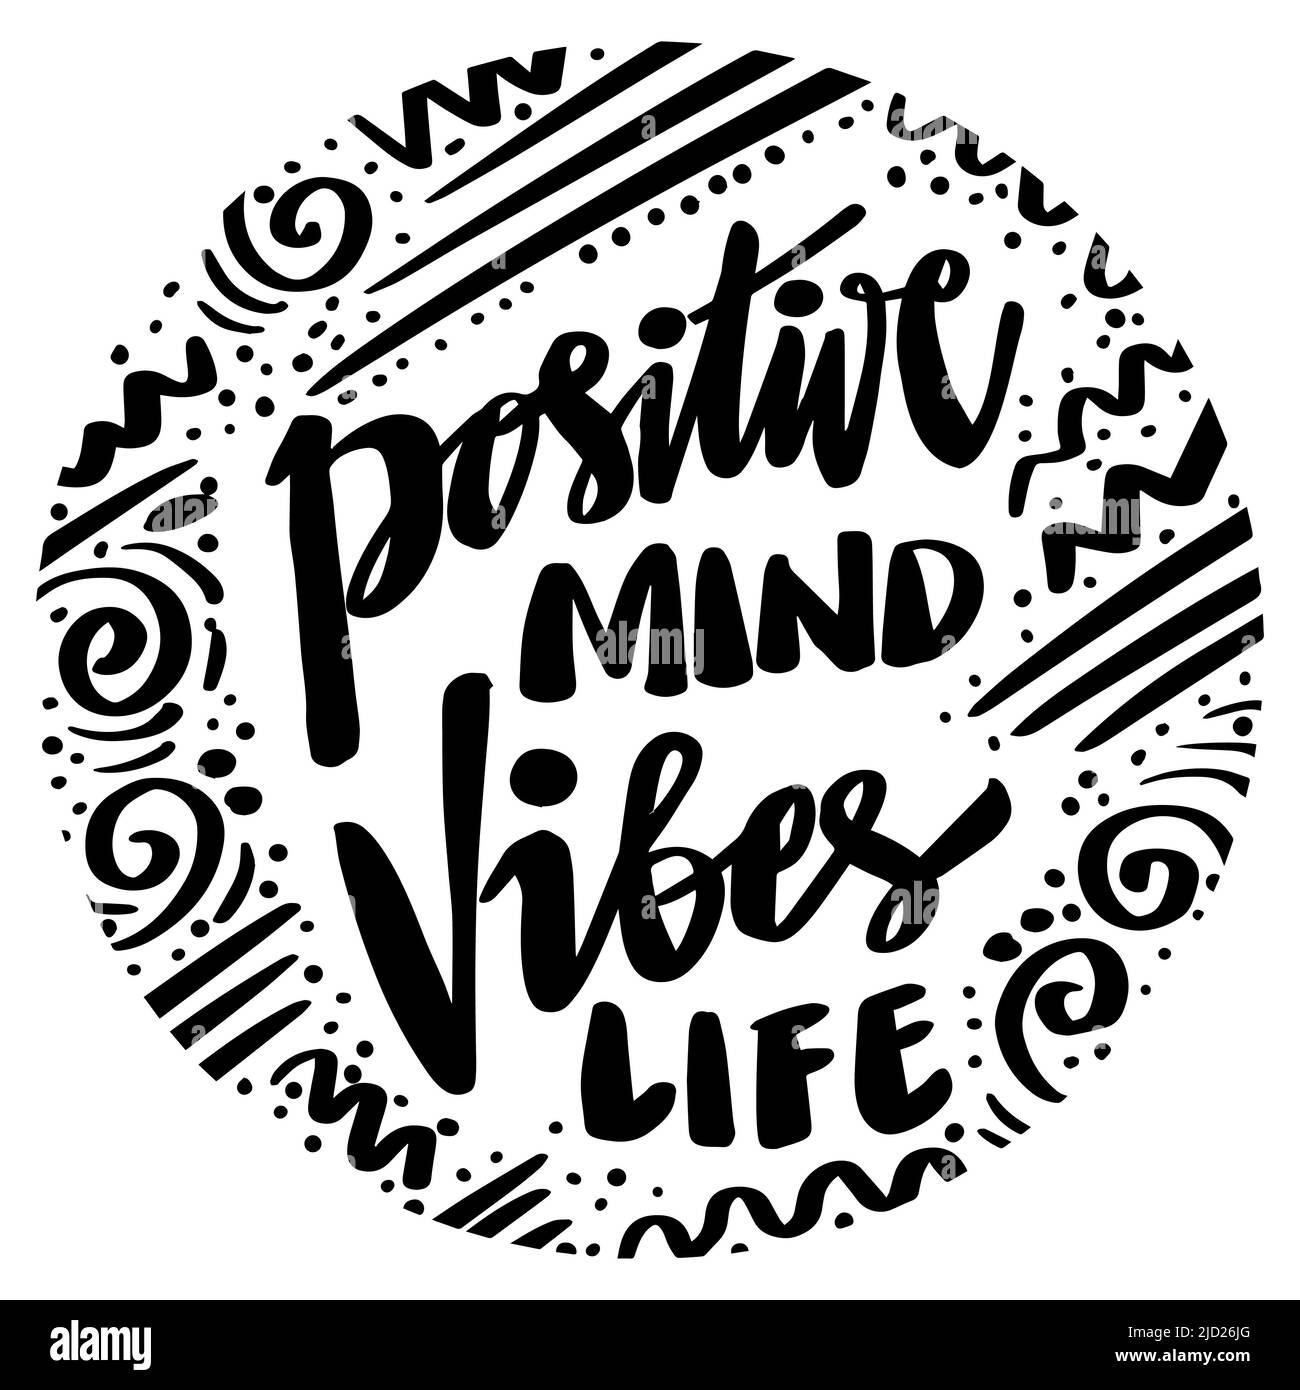 Positive mind vibes life on round background. Poster quotes. Stock Photo